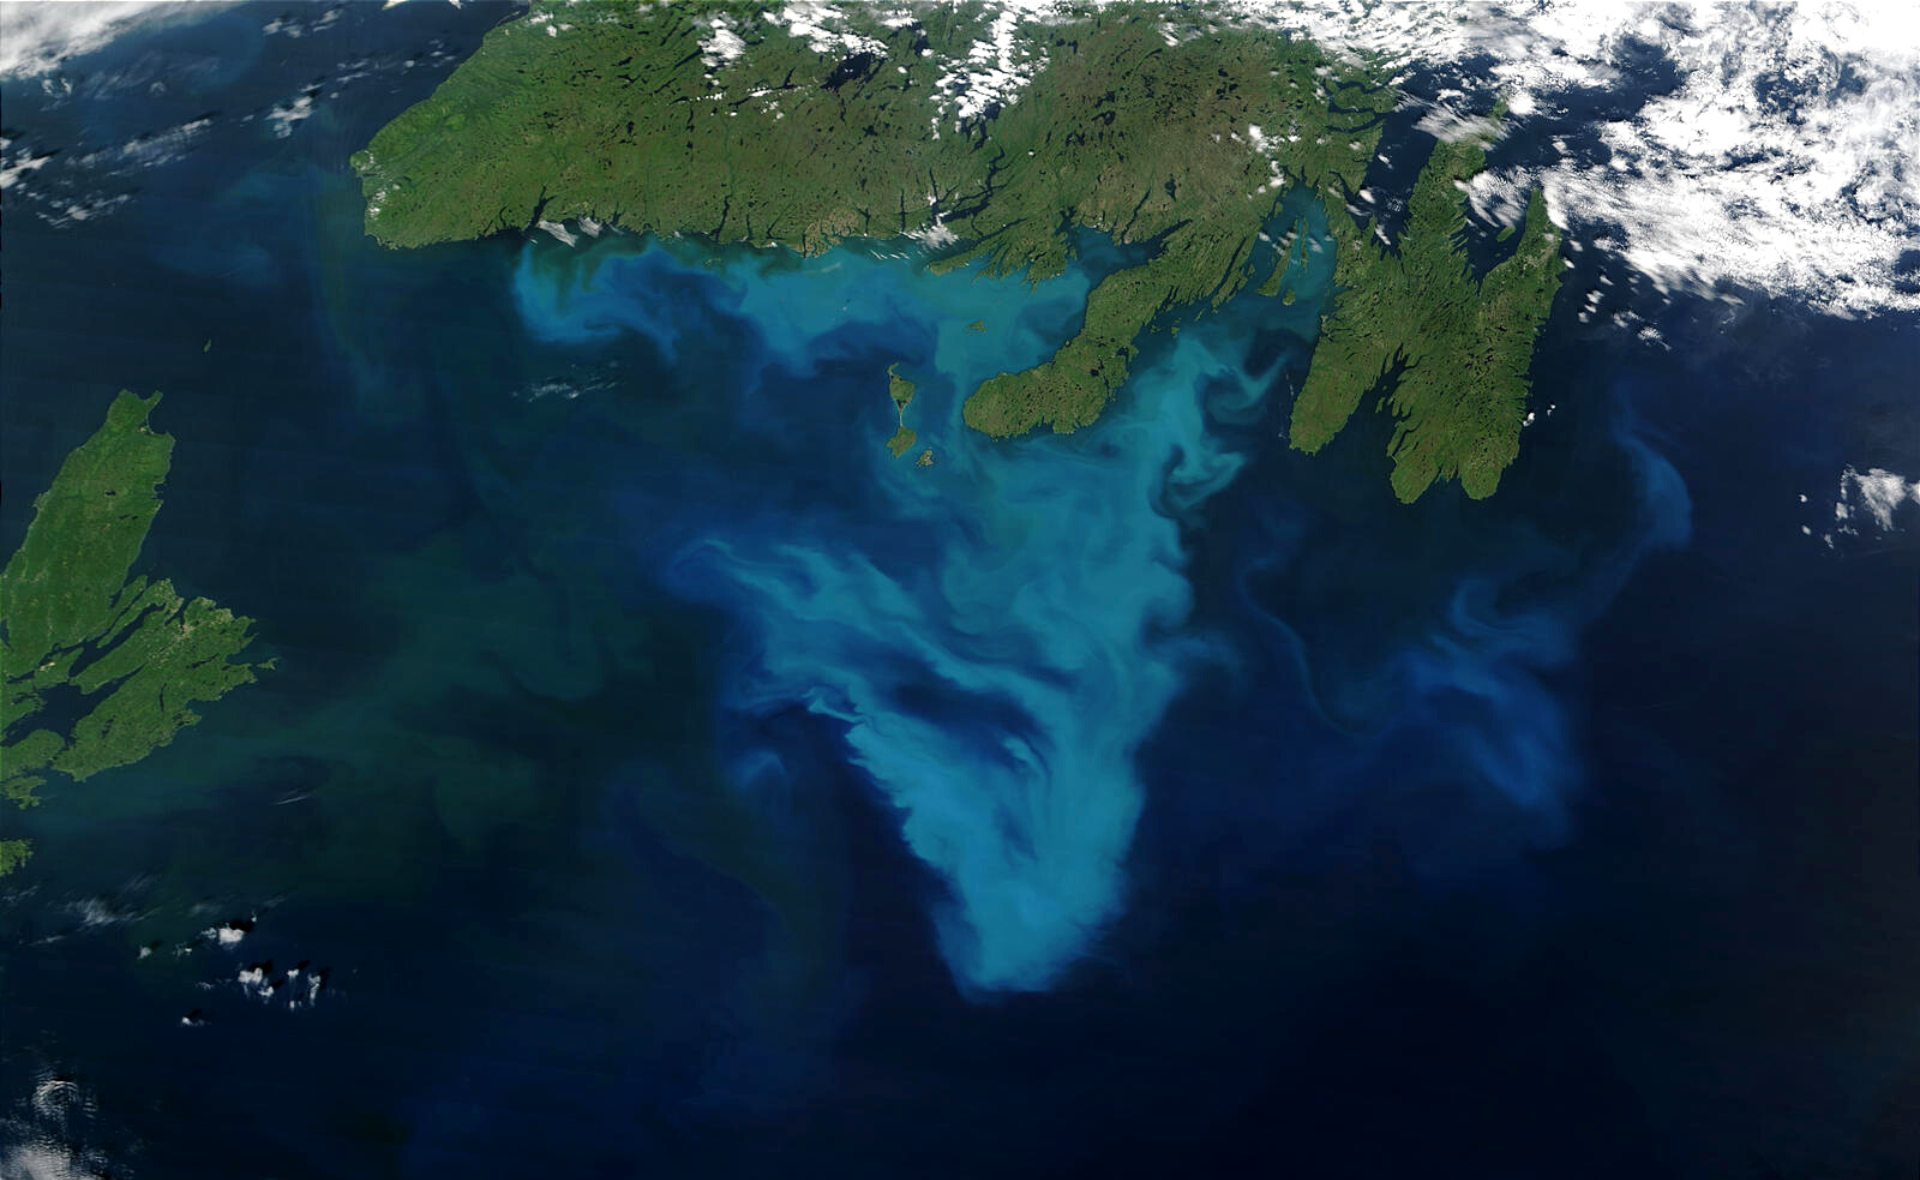 Phytoplankton bloom off Newfoundland, Canada. In the waters of the Atlantic Ocean, south of Newfoundland, Canada, a brightly colored blue swirl indicates the presence of an ongoing phytoplankton bloom.